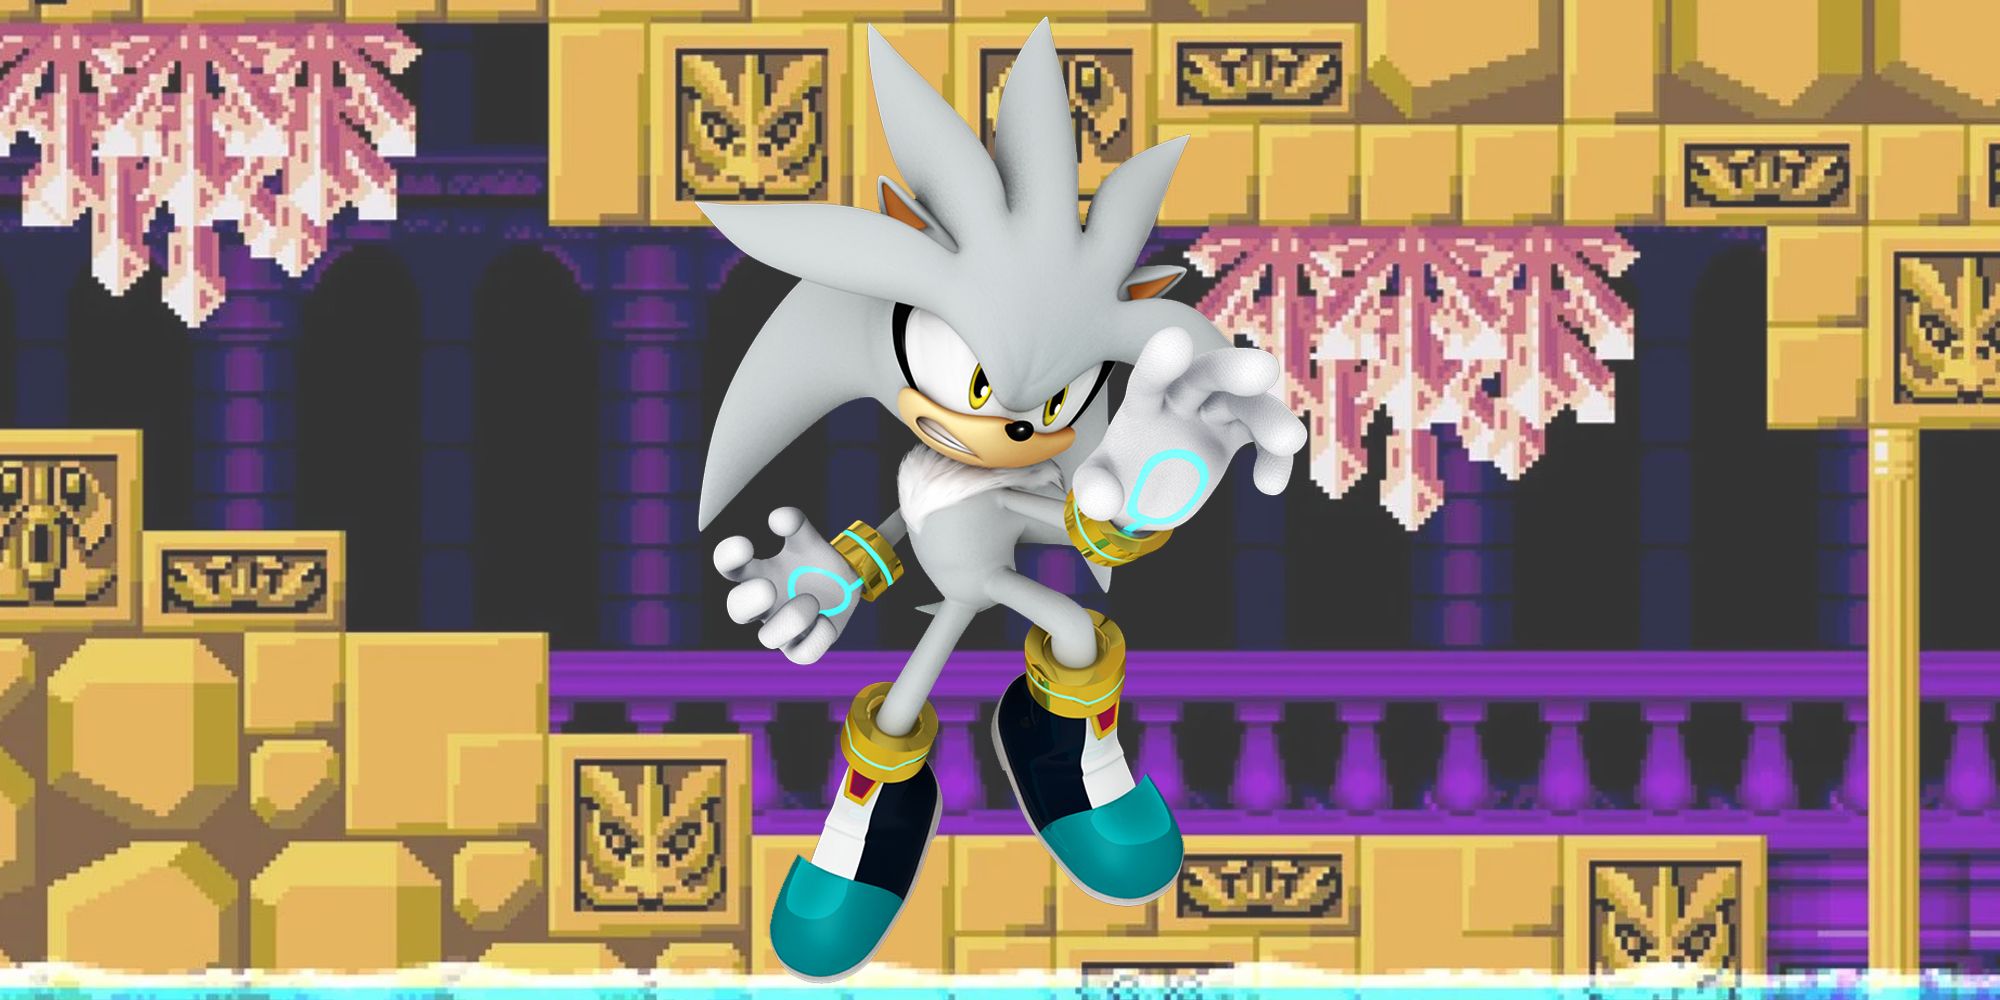 Silver the Hedgehog in Labryinth Zone